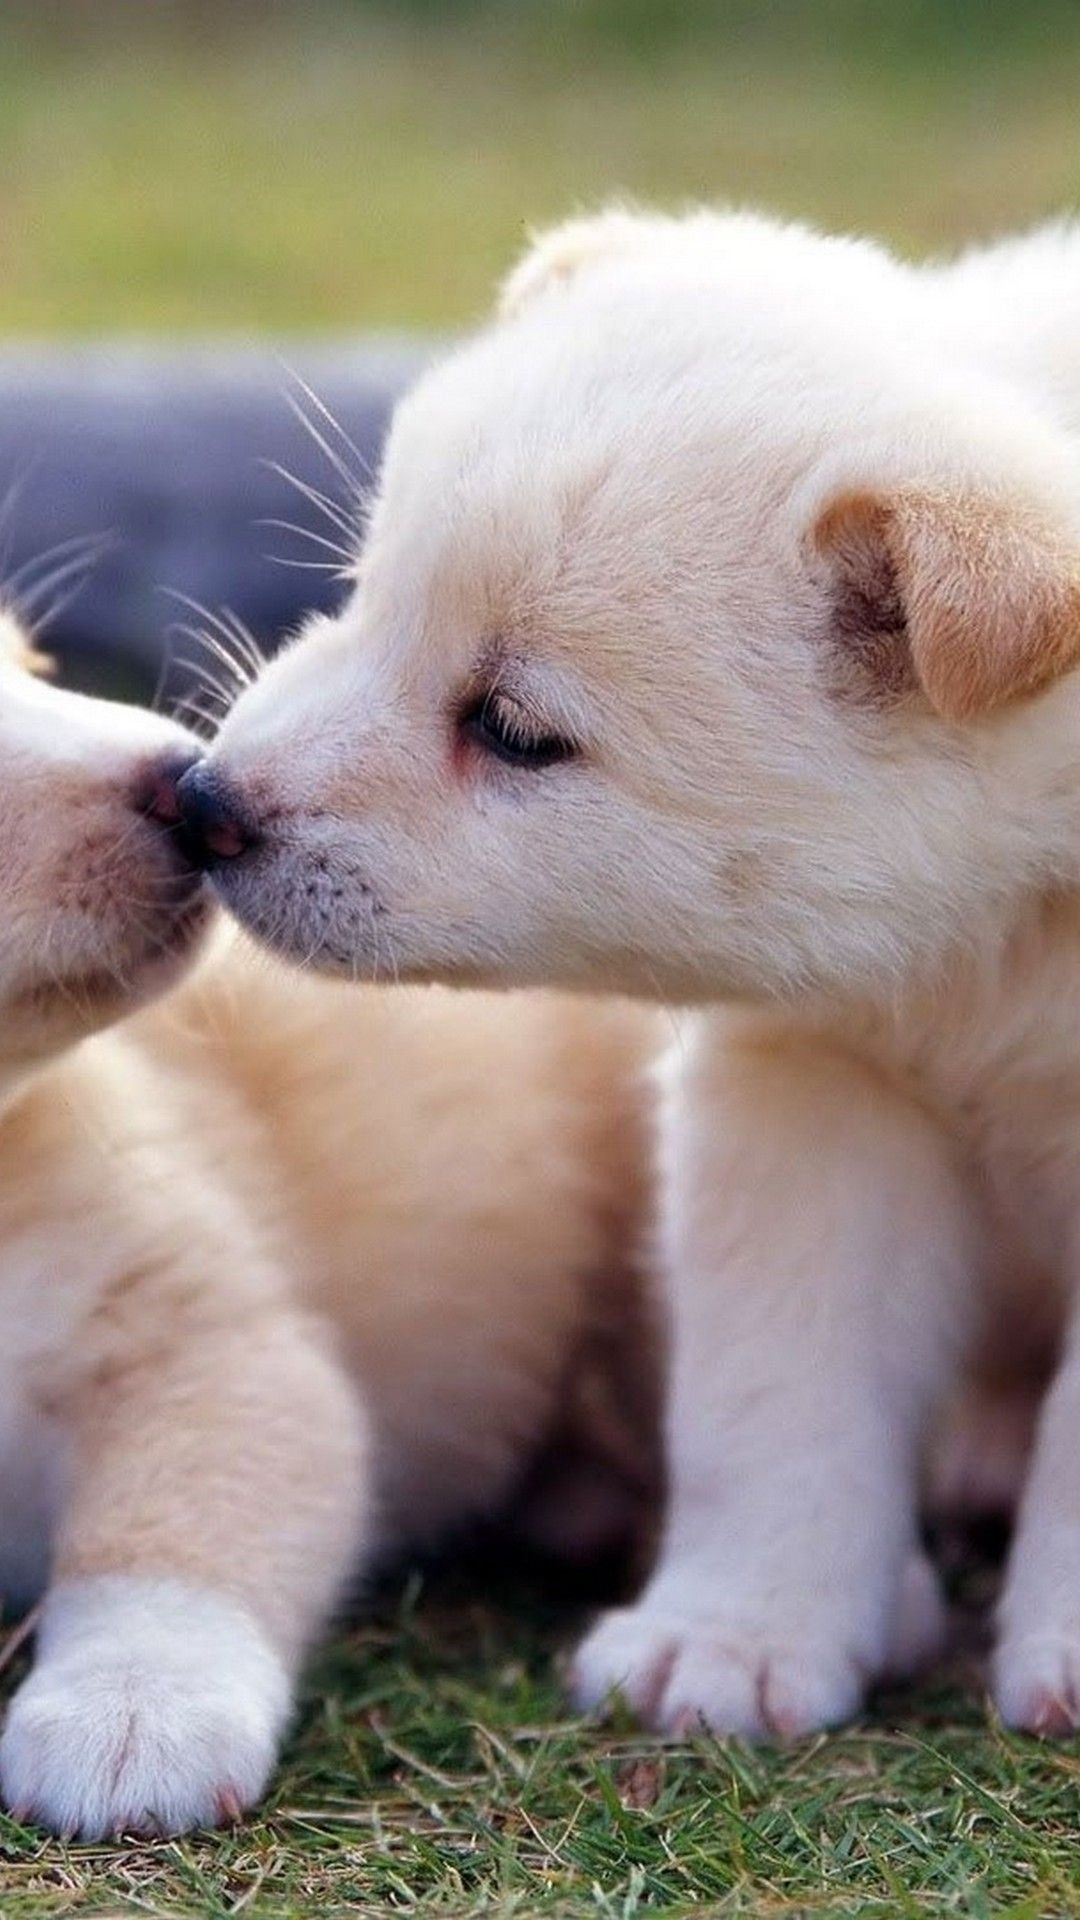 A pair of cute puppy dogs kissing on the grass - Puppy